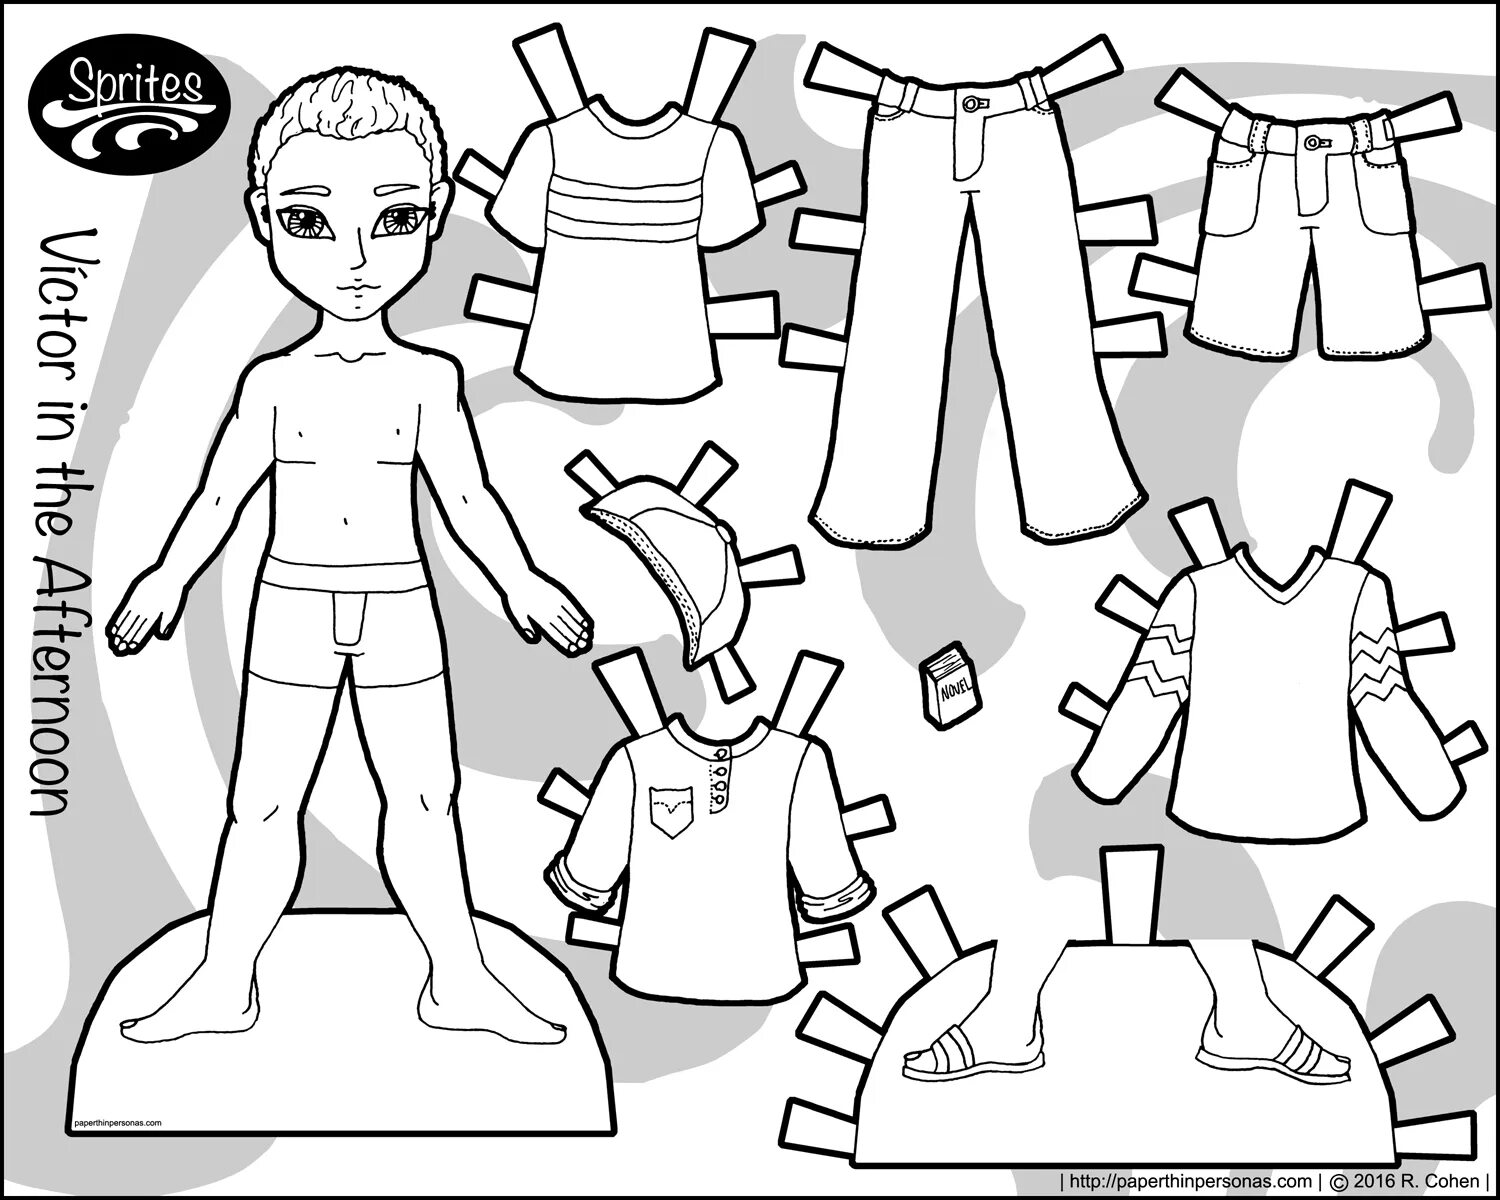 Paper doll boy with cutout clothes #16